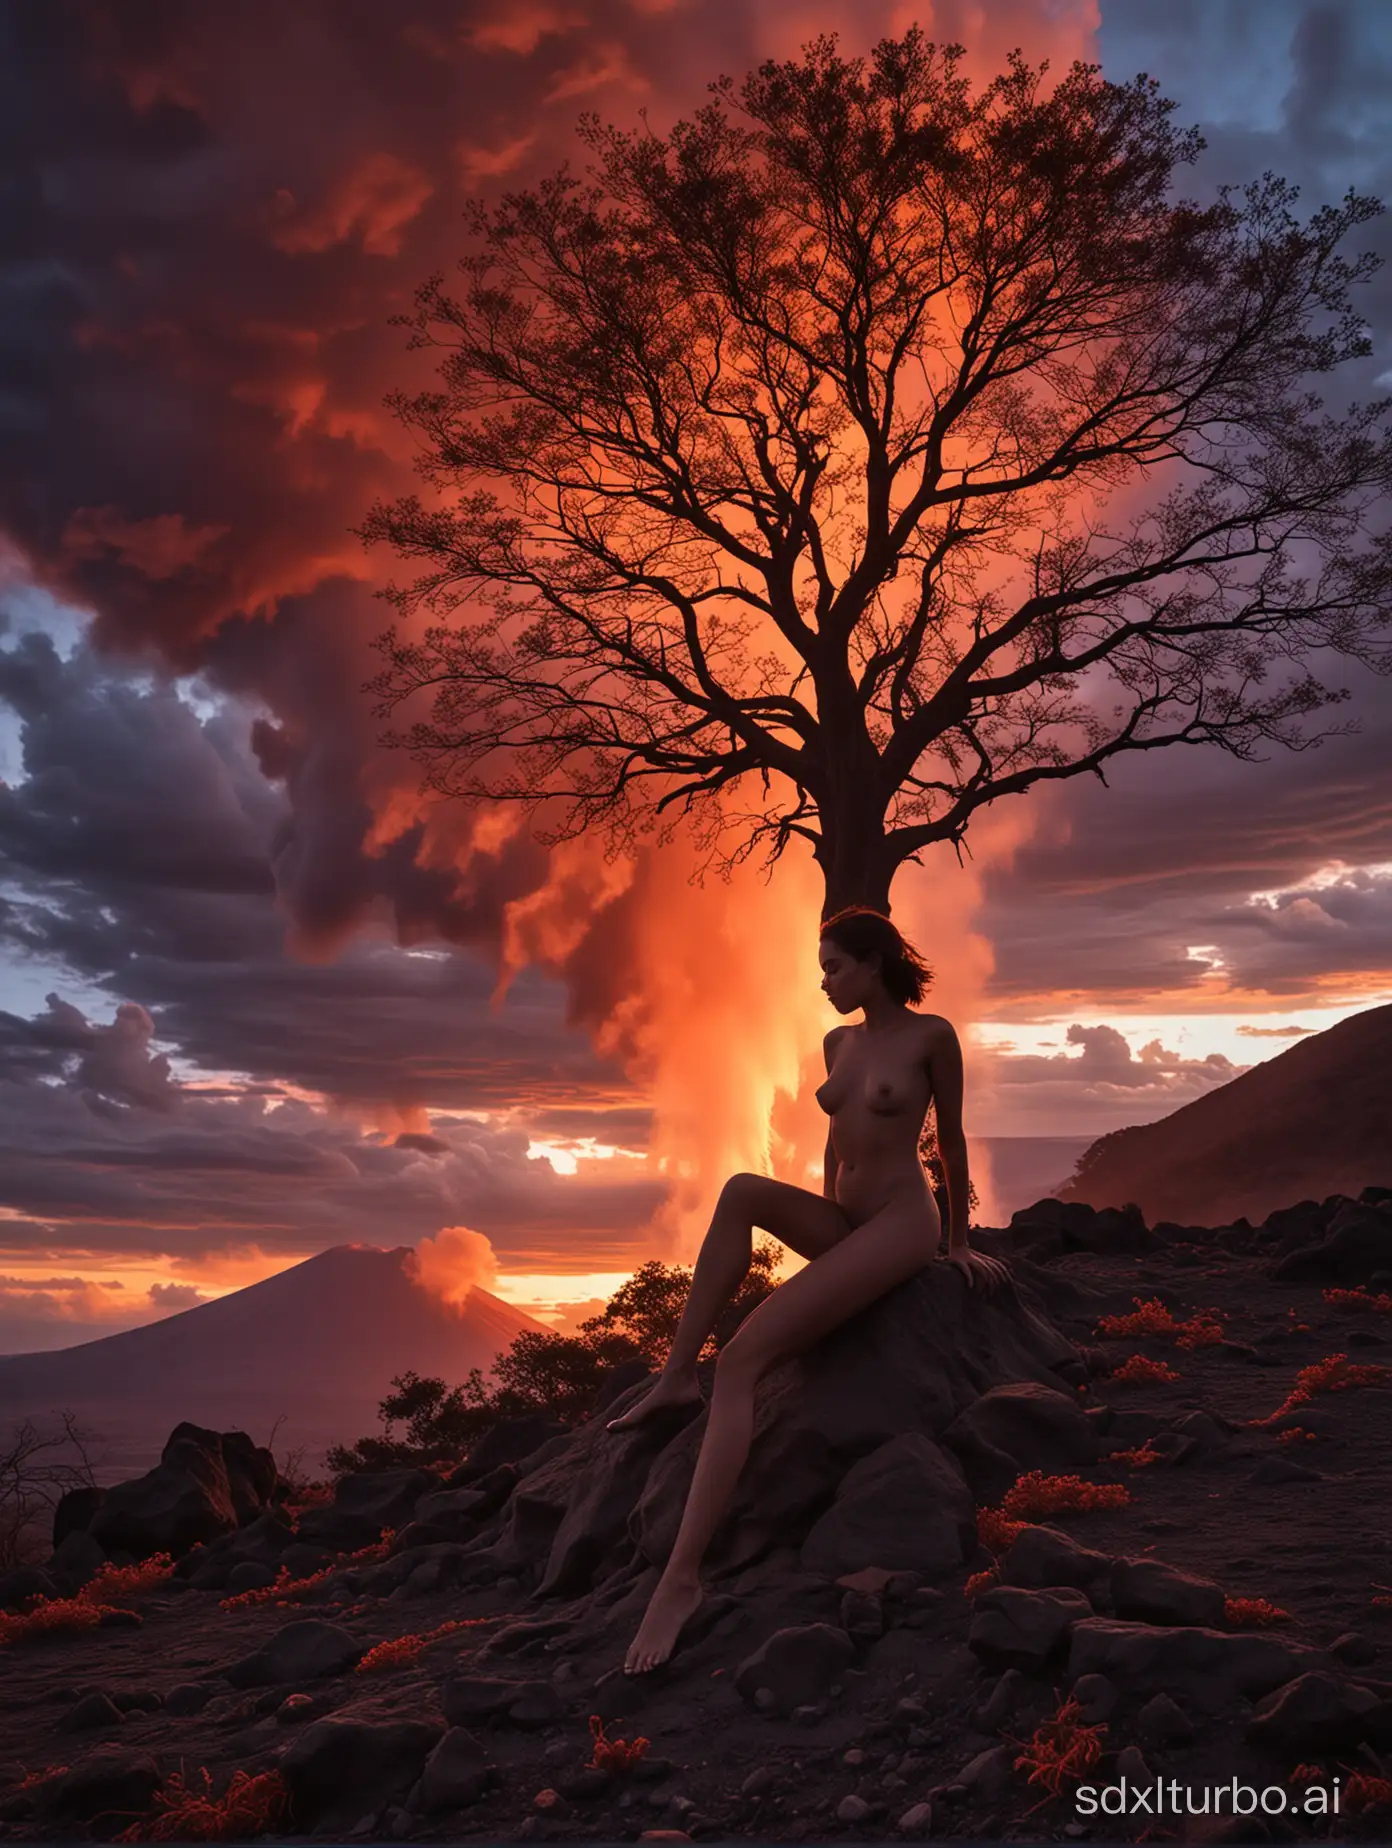 Create an image that depicts a dramatic and evocative scene with an adventurous touch. The scene features a beautiful naked woman, seated on the ground, gazing directly at the viewers, enhancing the scene's engagement. She is part of the landscape where clouds weave through the fiery glow of an active volcano's eruption. The solitary, stalwart tree stands against this powerful backdrop, bathed in the light from the volcanic glow and the sun on the horizon. Her silhouette adds to the scene's intrigue, her form capturing the attention amidst the rich palette of deep reds, vibrant oranges, and intense yellows, which boldly contrast with the cooler blues and purples of the sky.